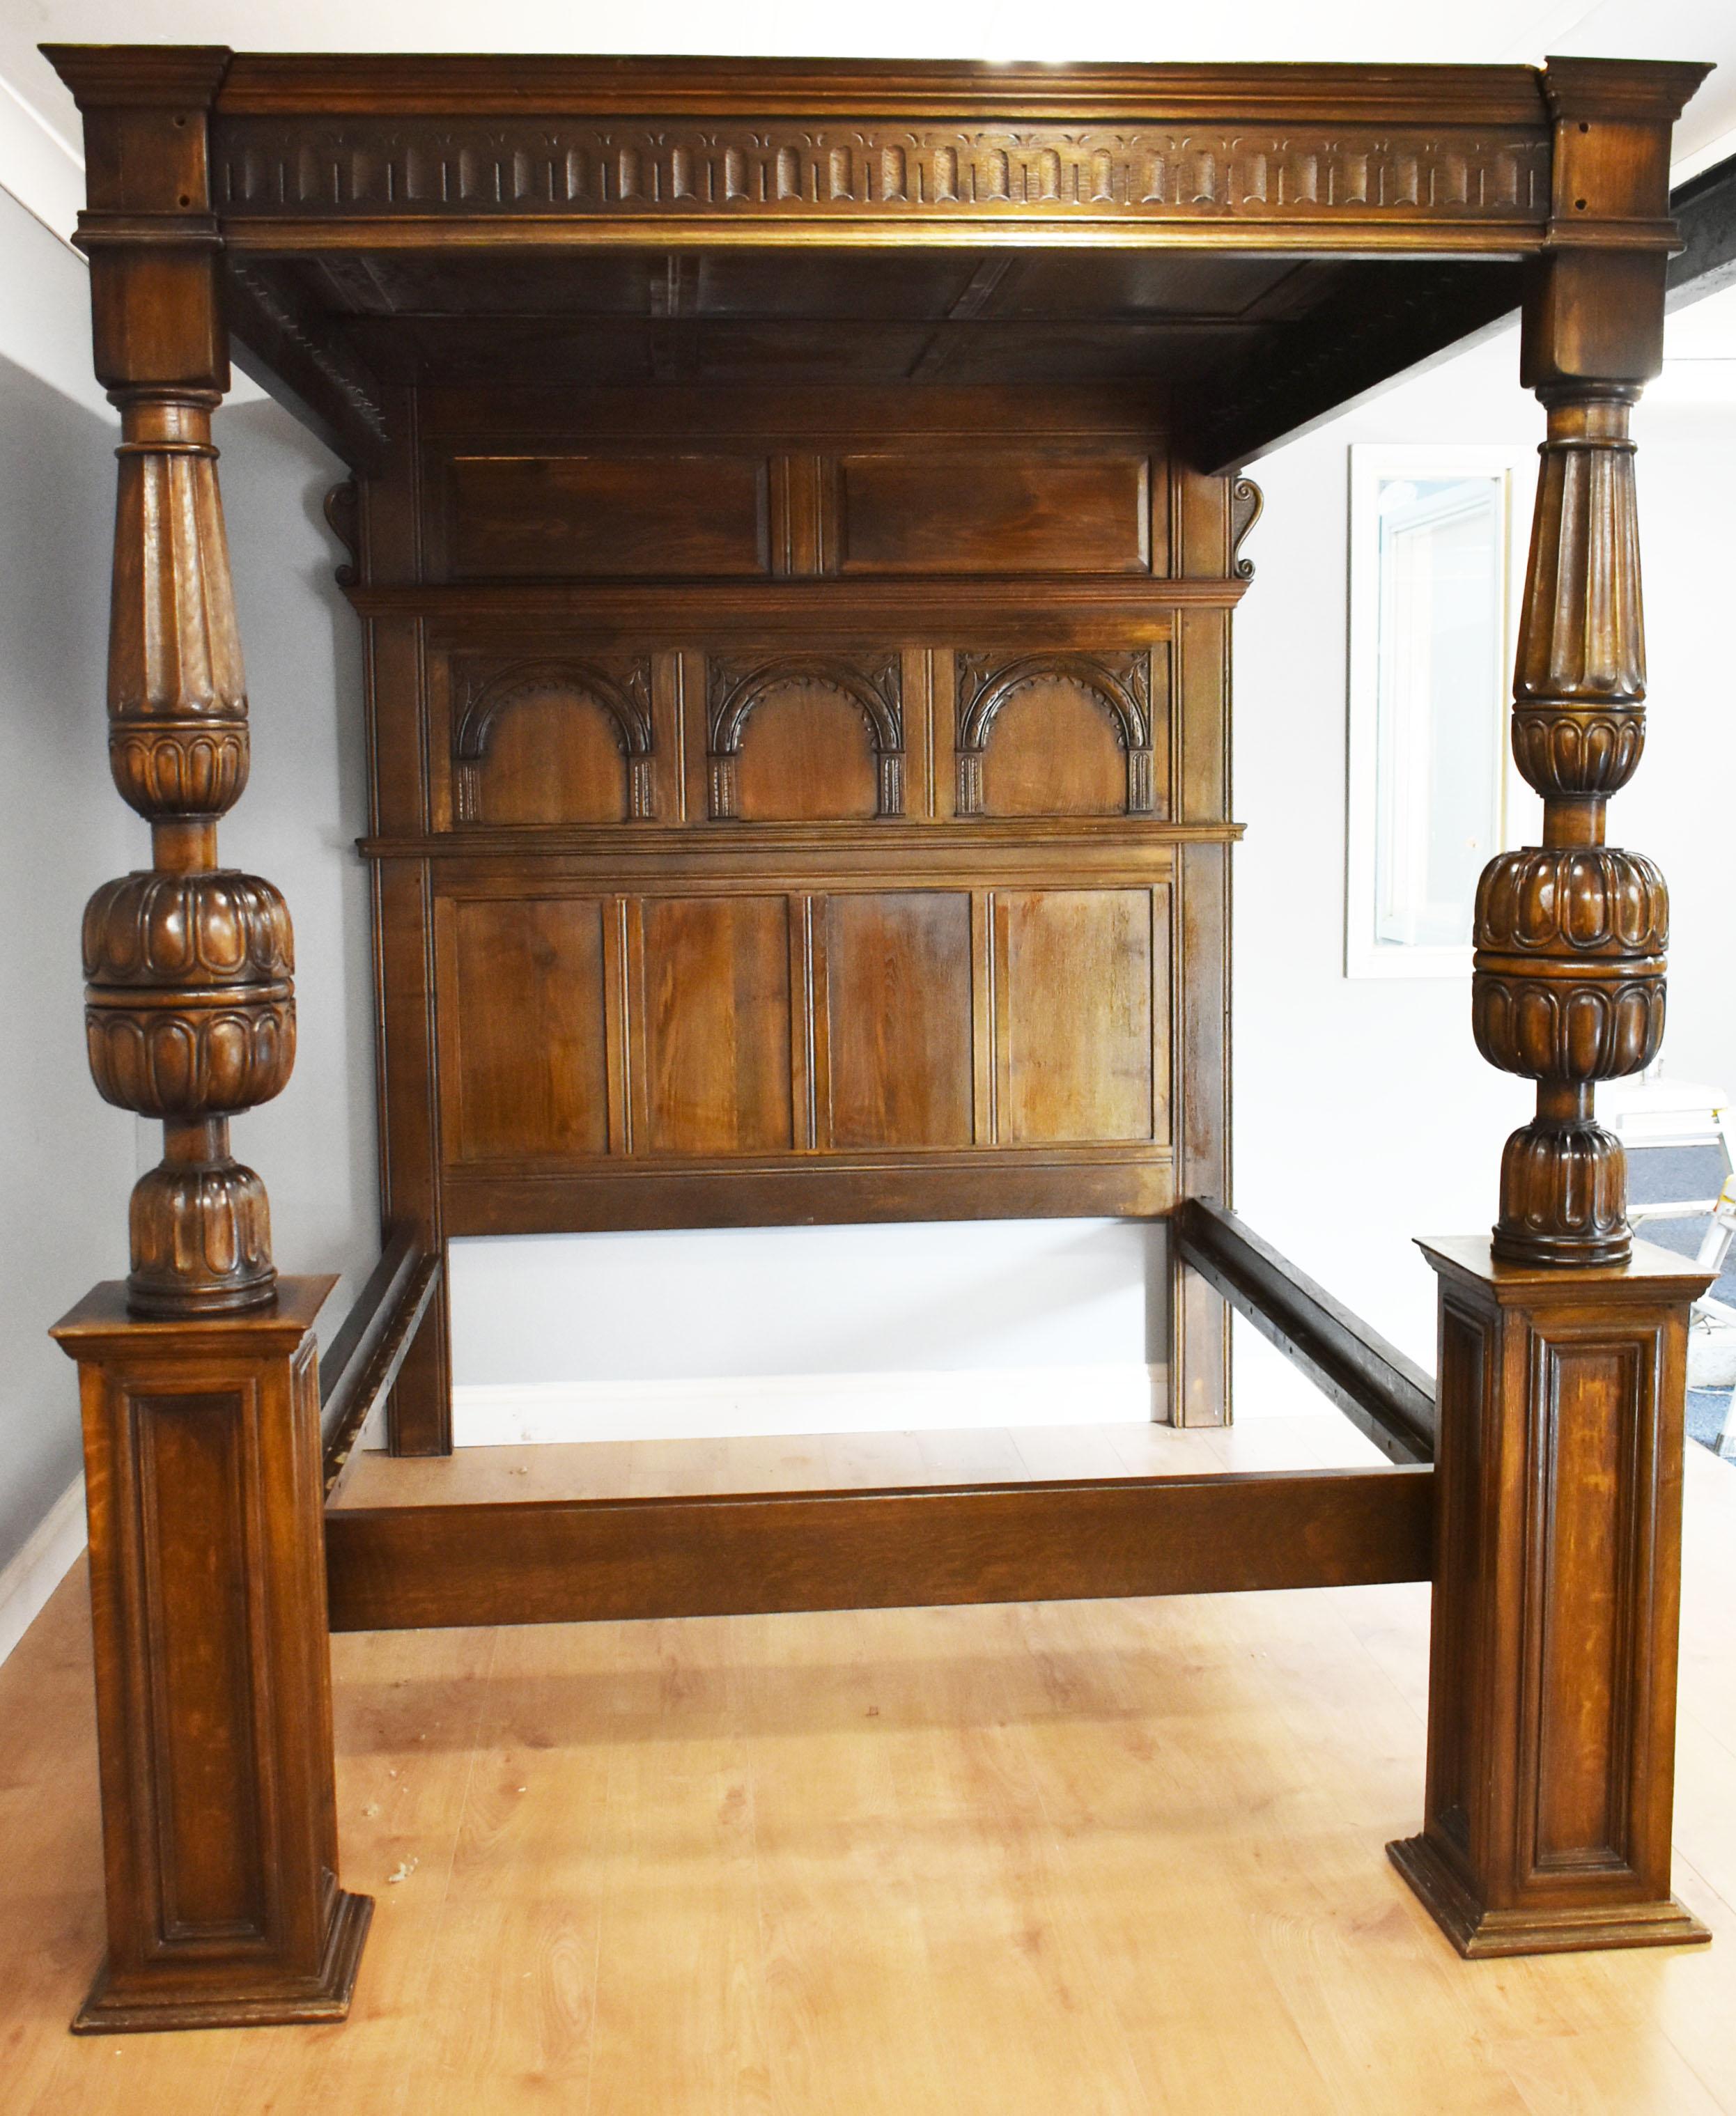 Elizabethan 17th Century Style Carved Oak Four-Poster Bed